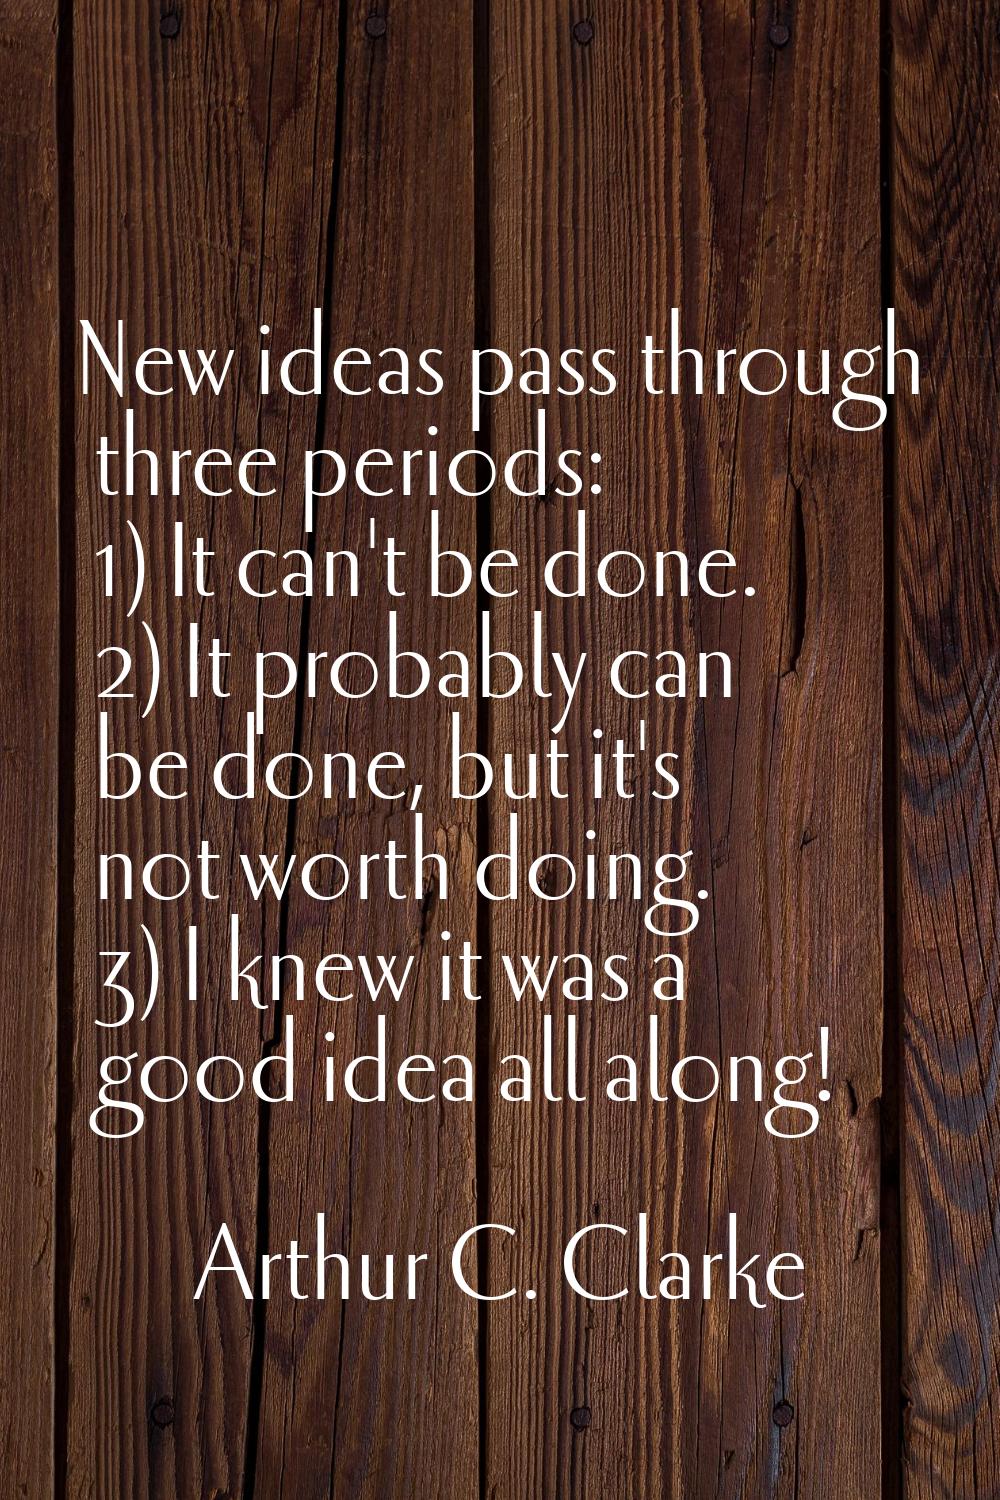 New ideas pass through three periods: 1) It can't be done. 2) It probably can be done, but it's not